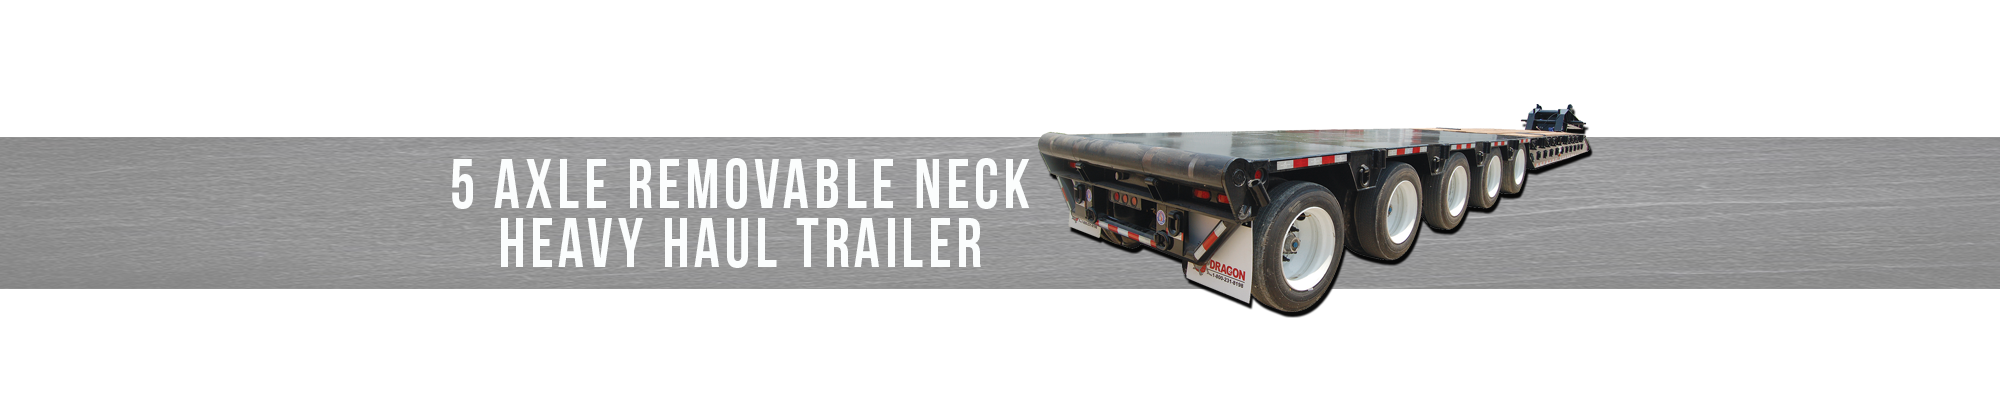 5 Axle Removable Neck